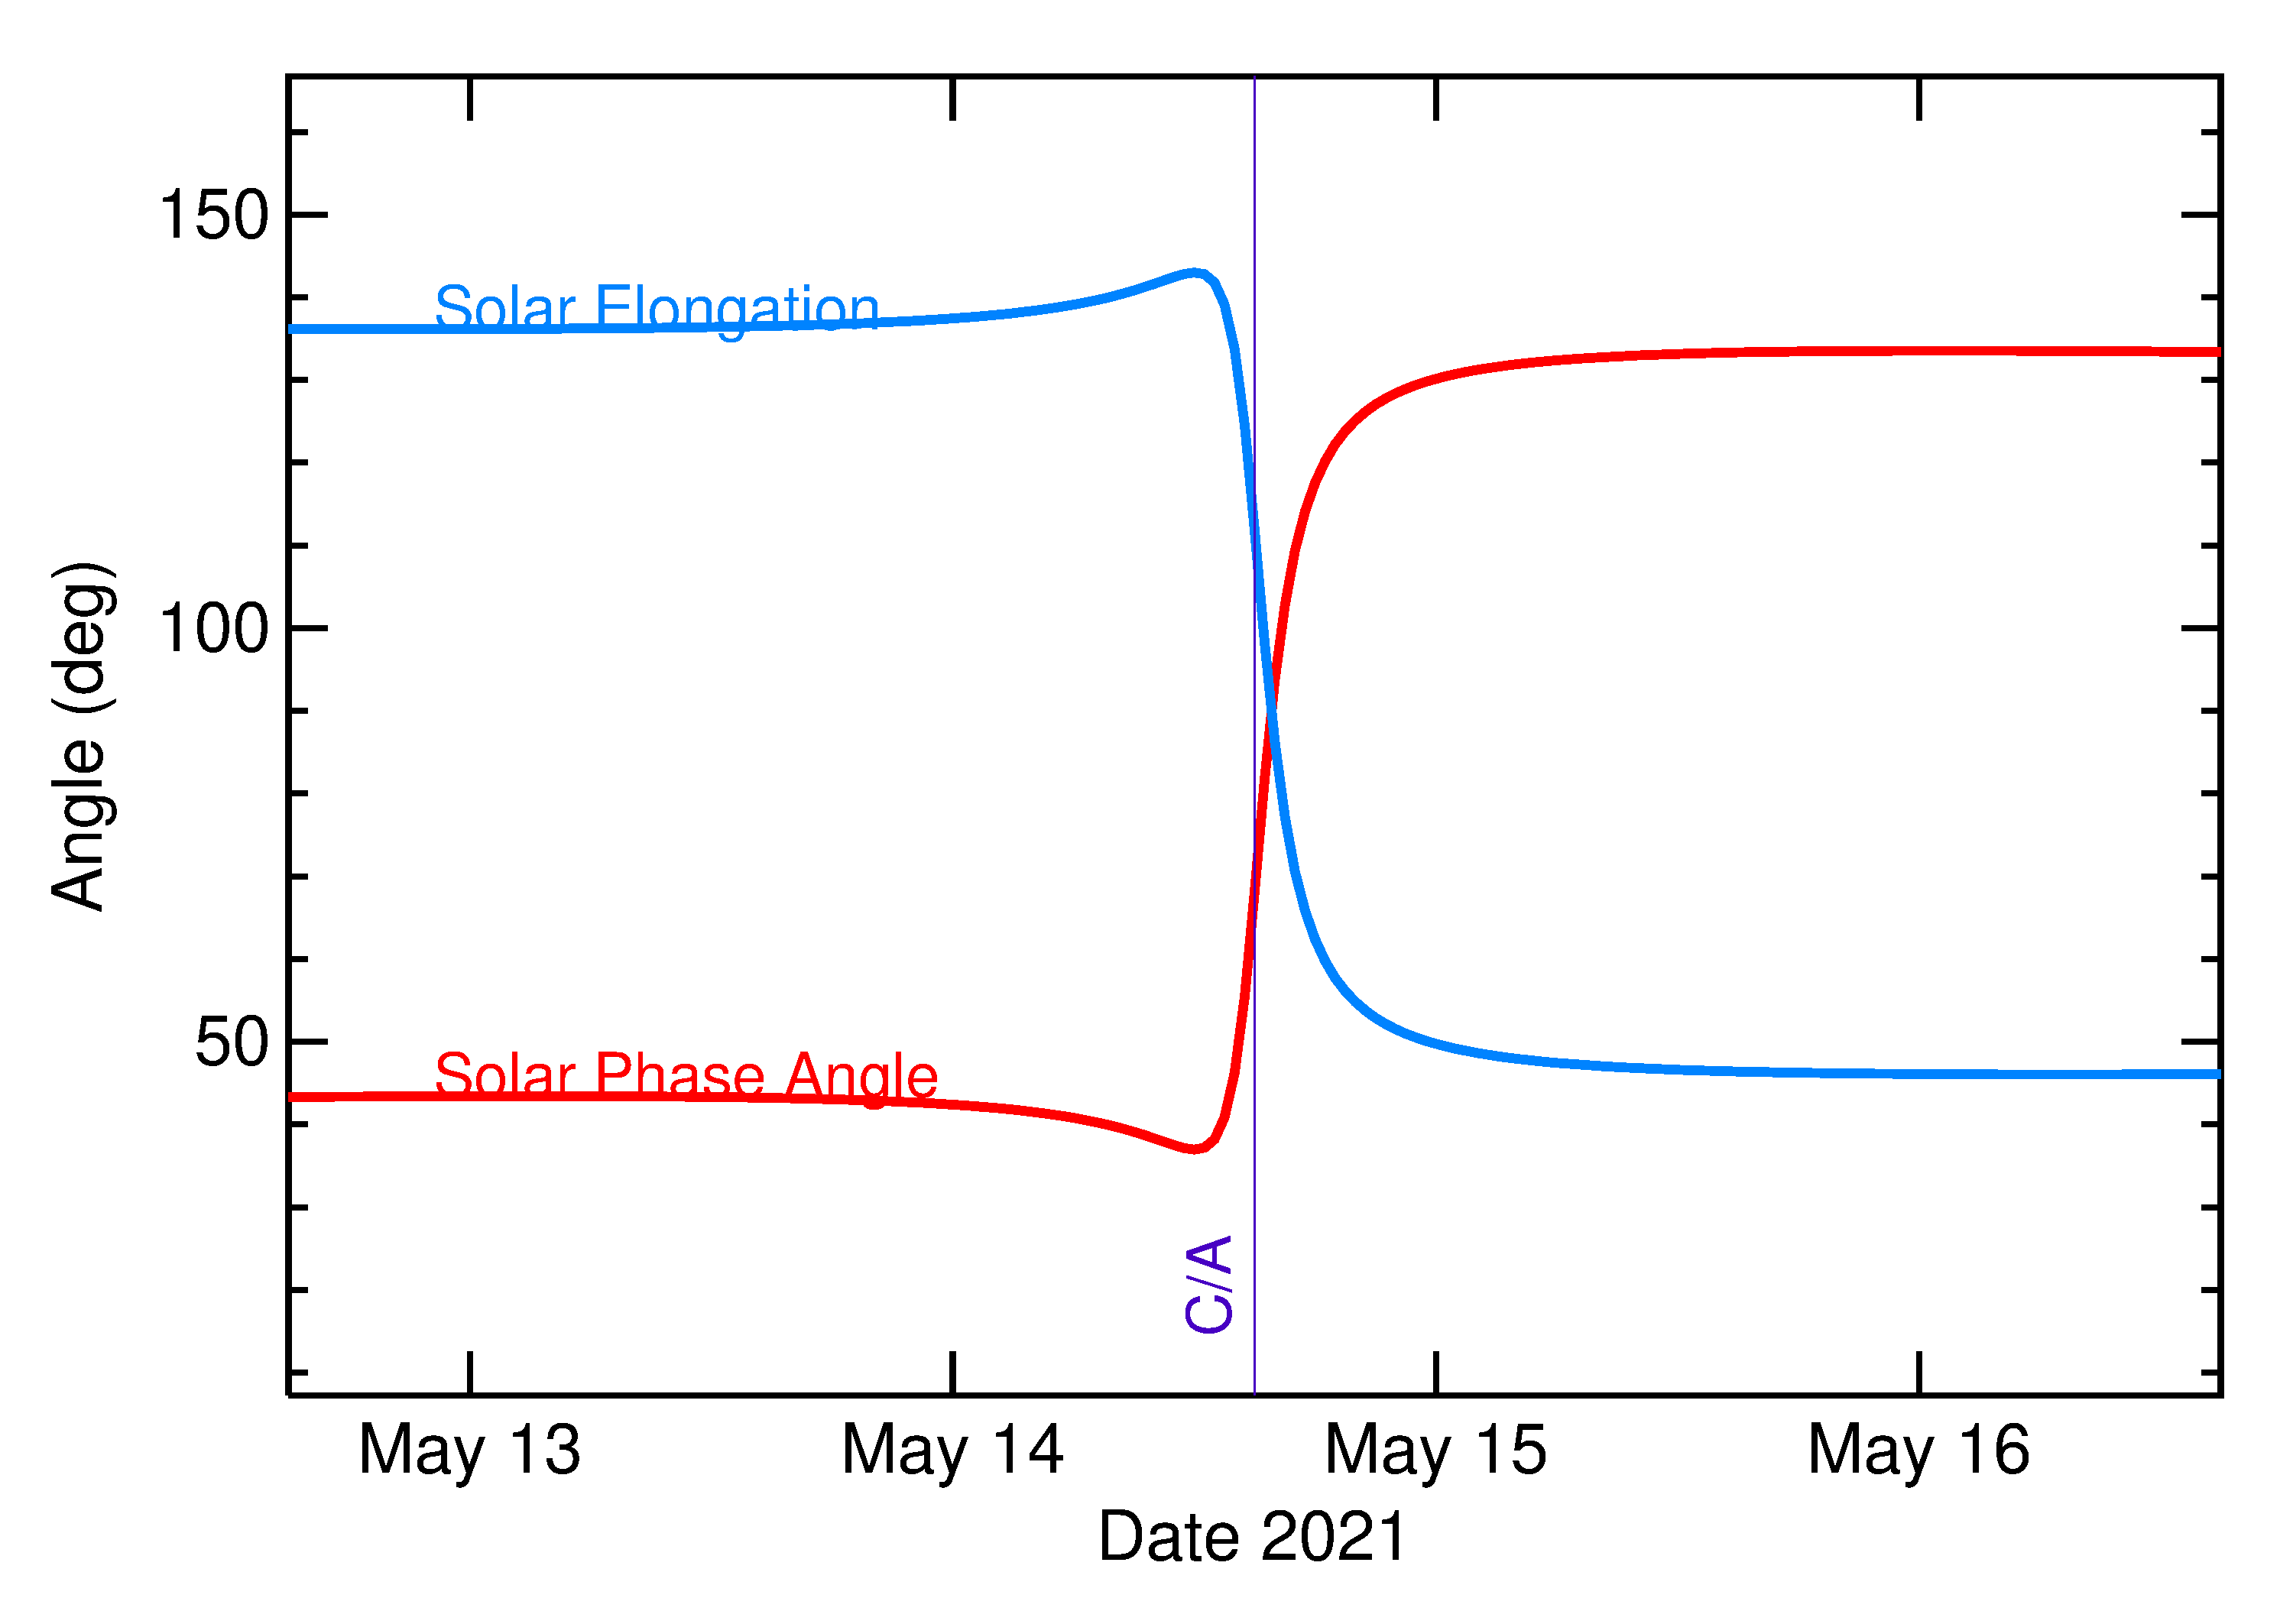 Solar Elongation and Solar Phase Angle of 2021 JU6 in the days around closest approach